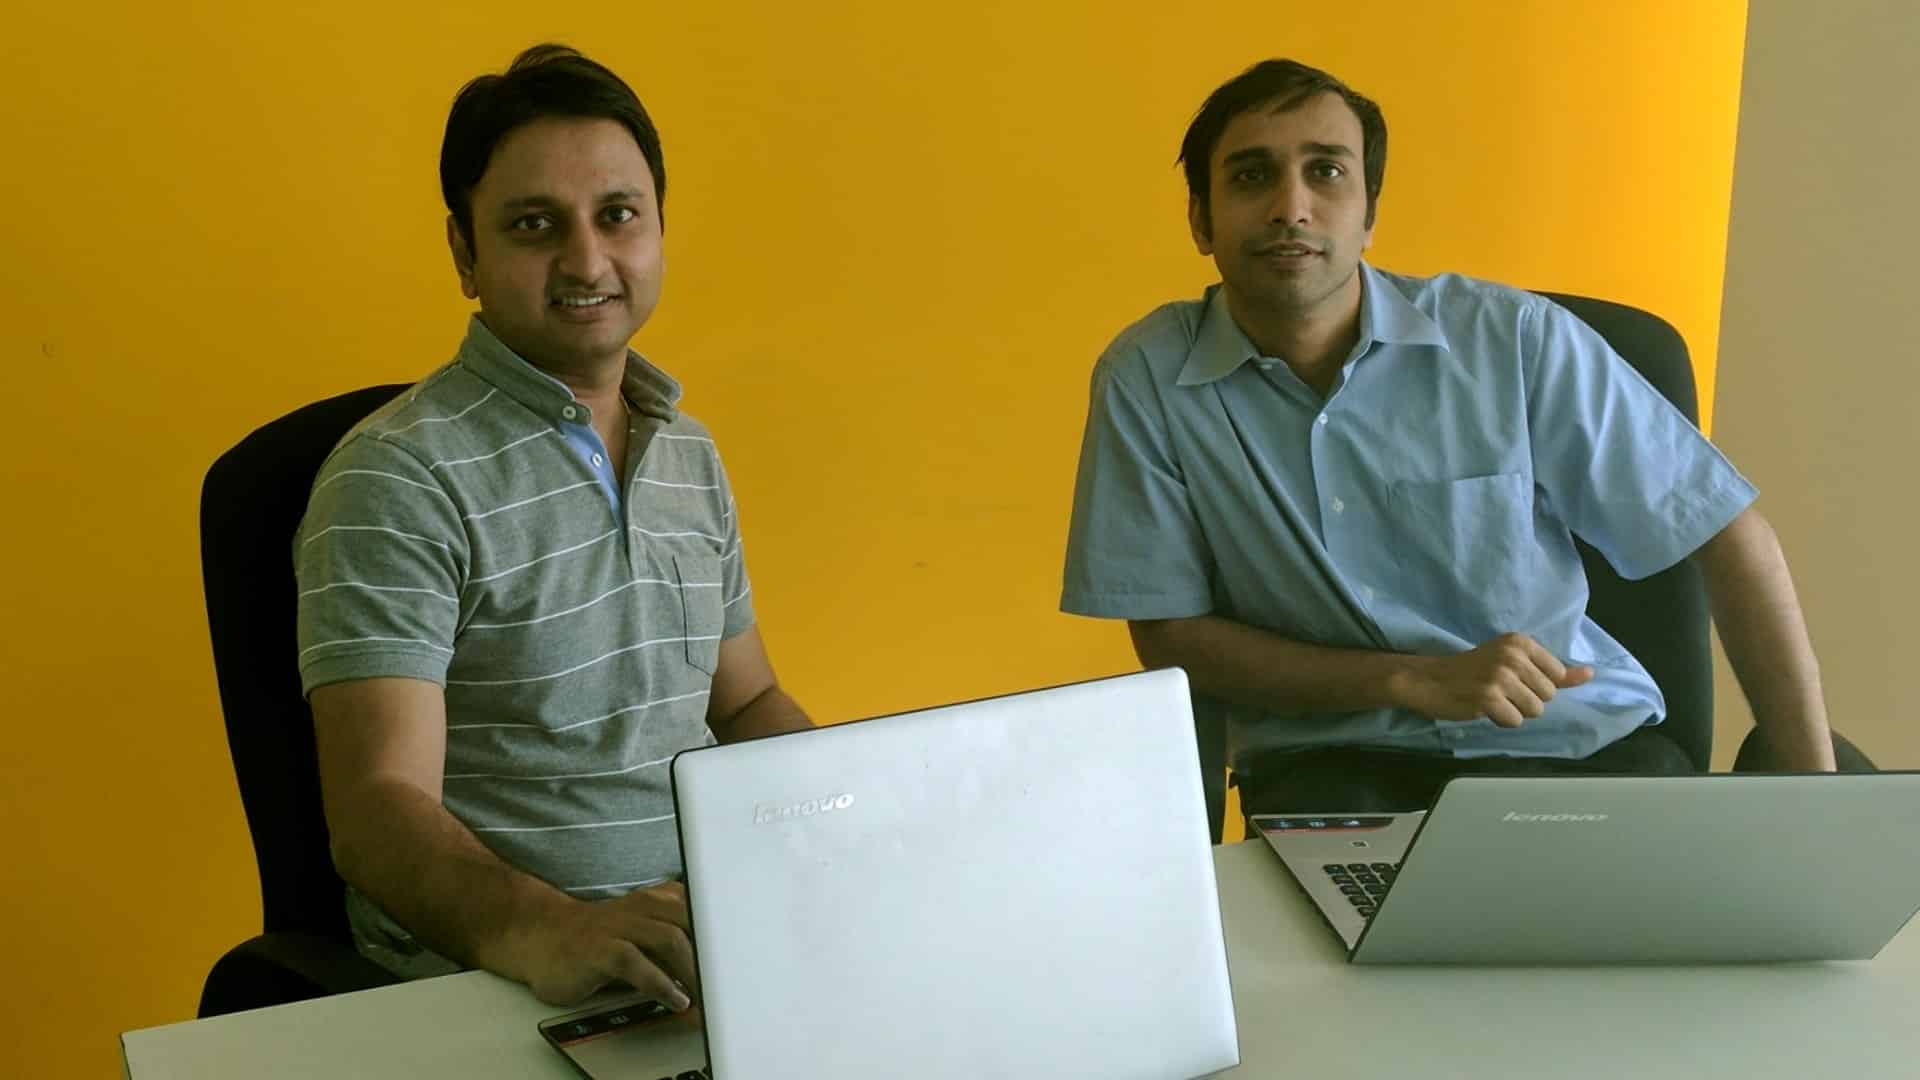 Oliveboard raises Rs 23 cr in funding round led by IAN Fund